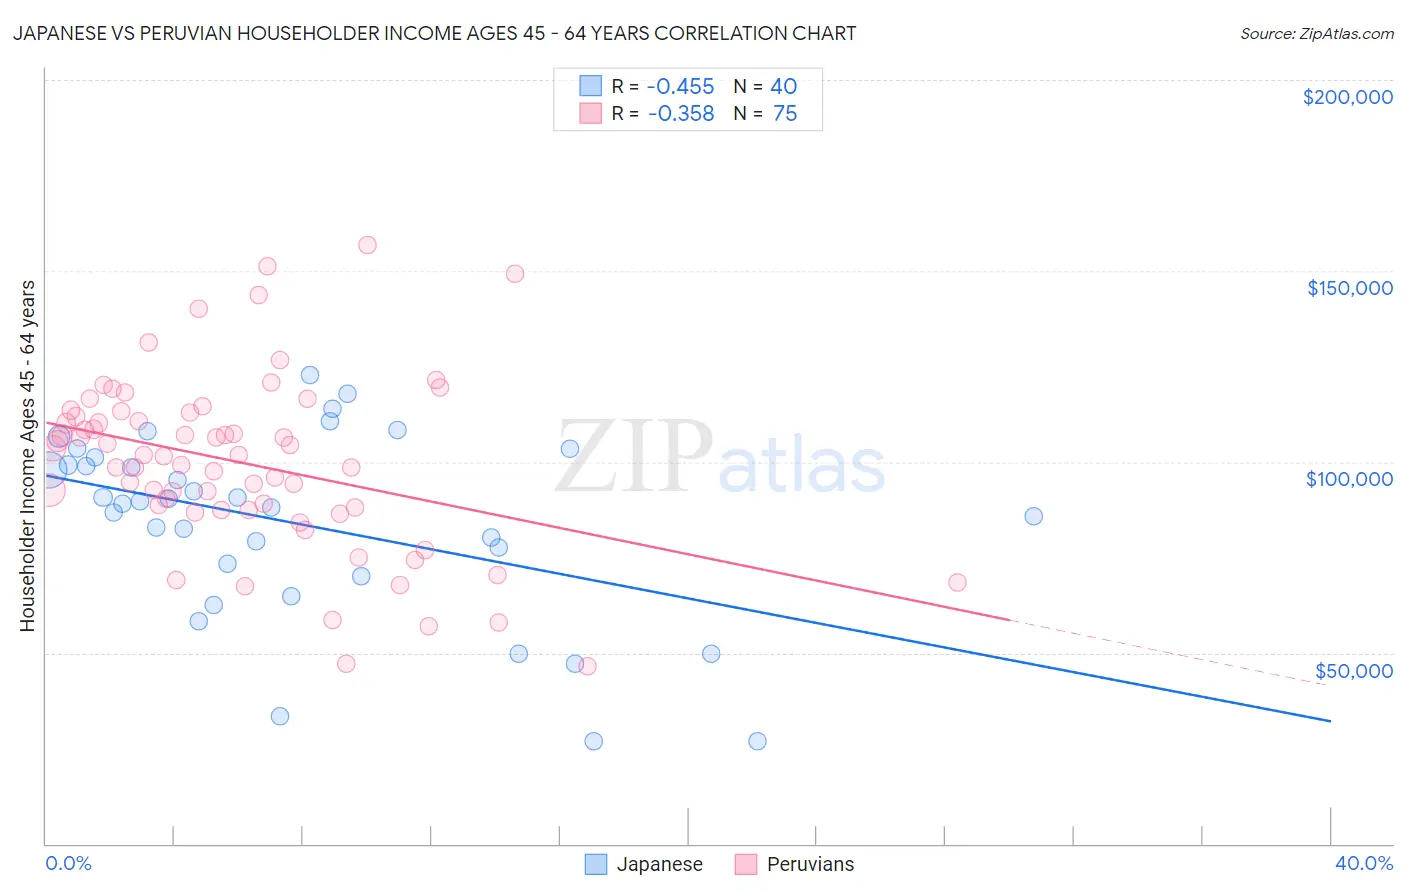 Japanese vs Peruvian Householder Income Ages 45 - 64 years